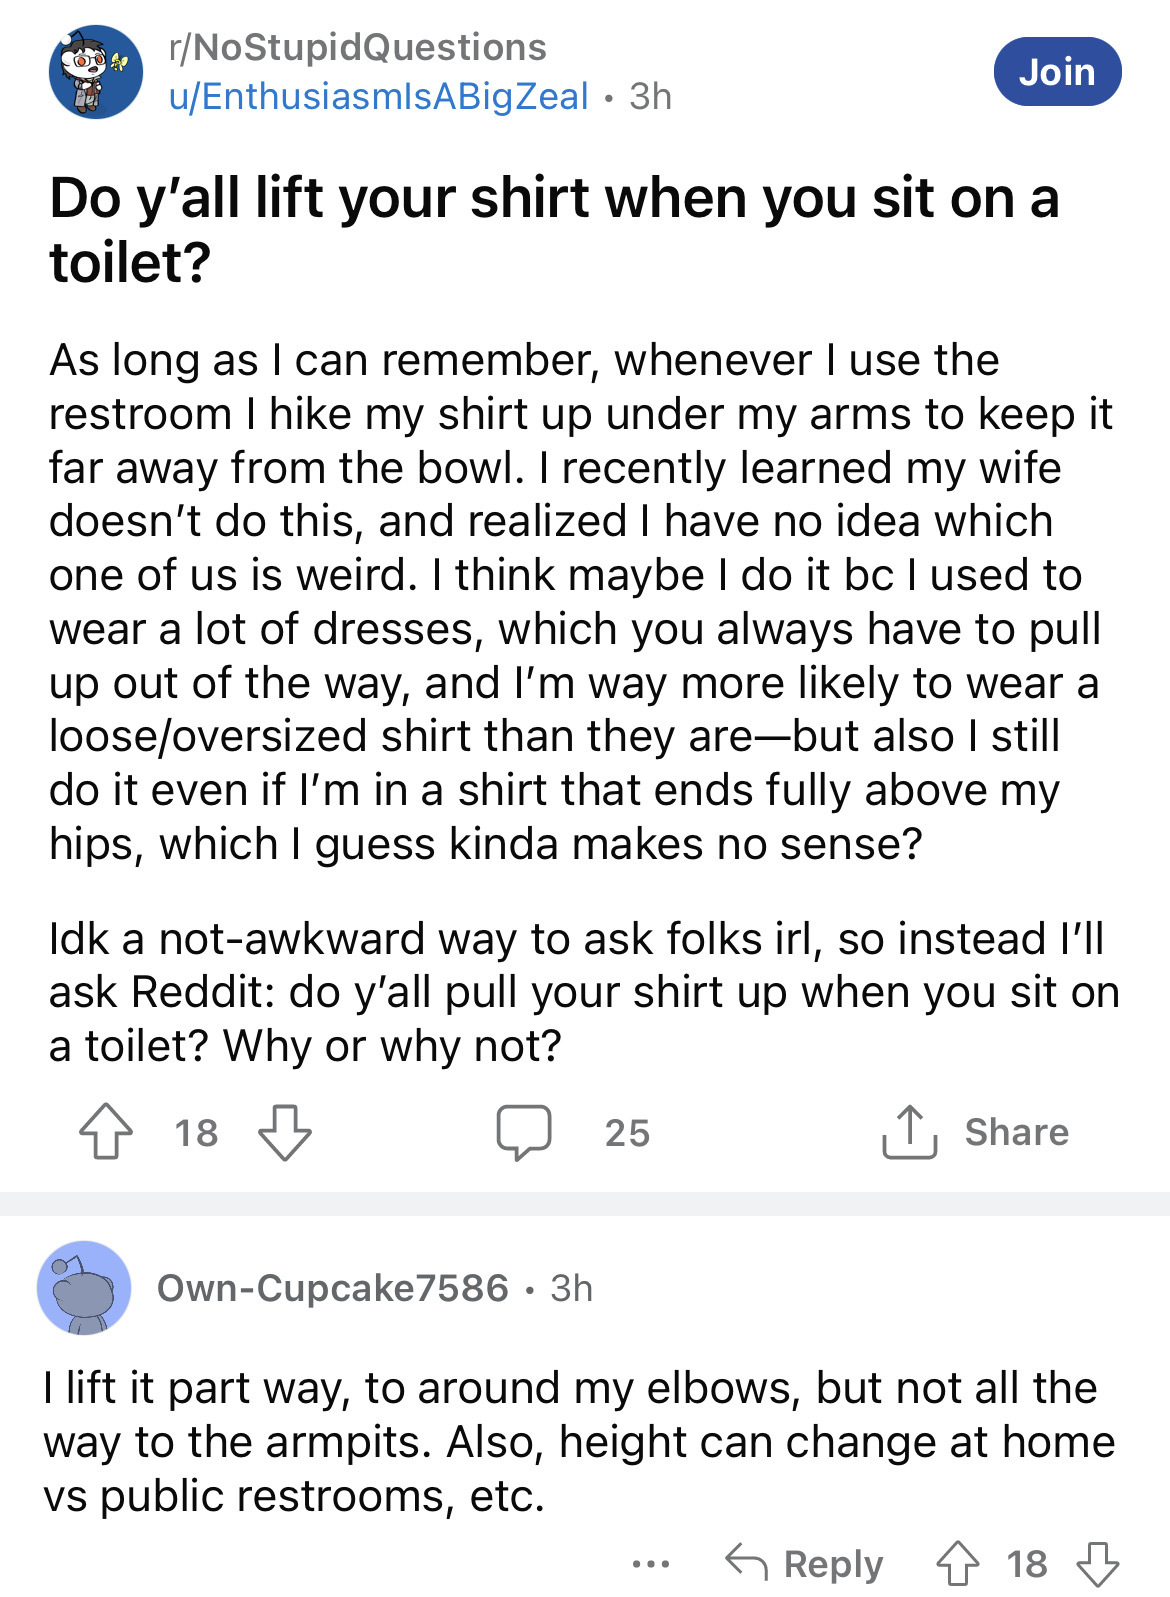 18 Times r/NoStupidQuestions Proved Itself Wrong 